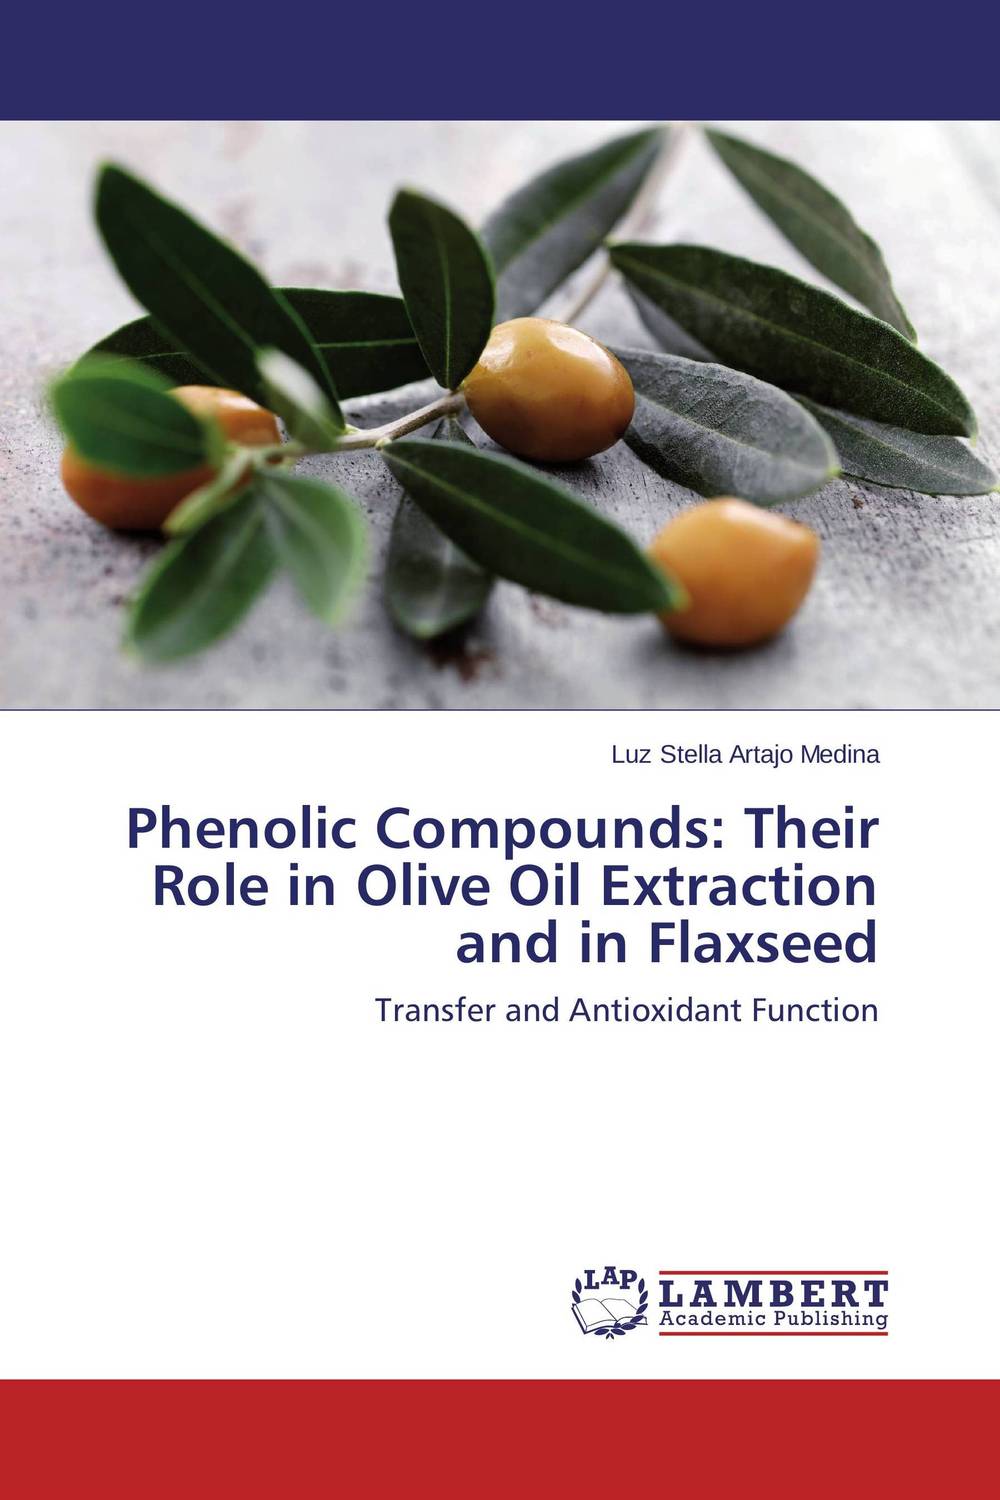 Phenolic Compounds: Their Role in Olive Oil Extraction and in Flaxseed